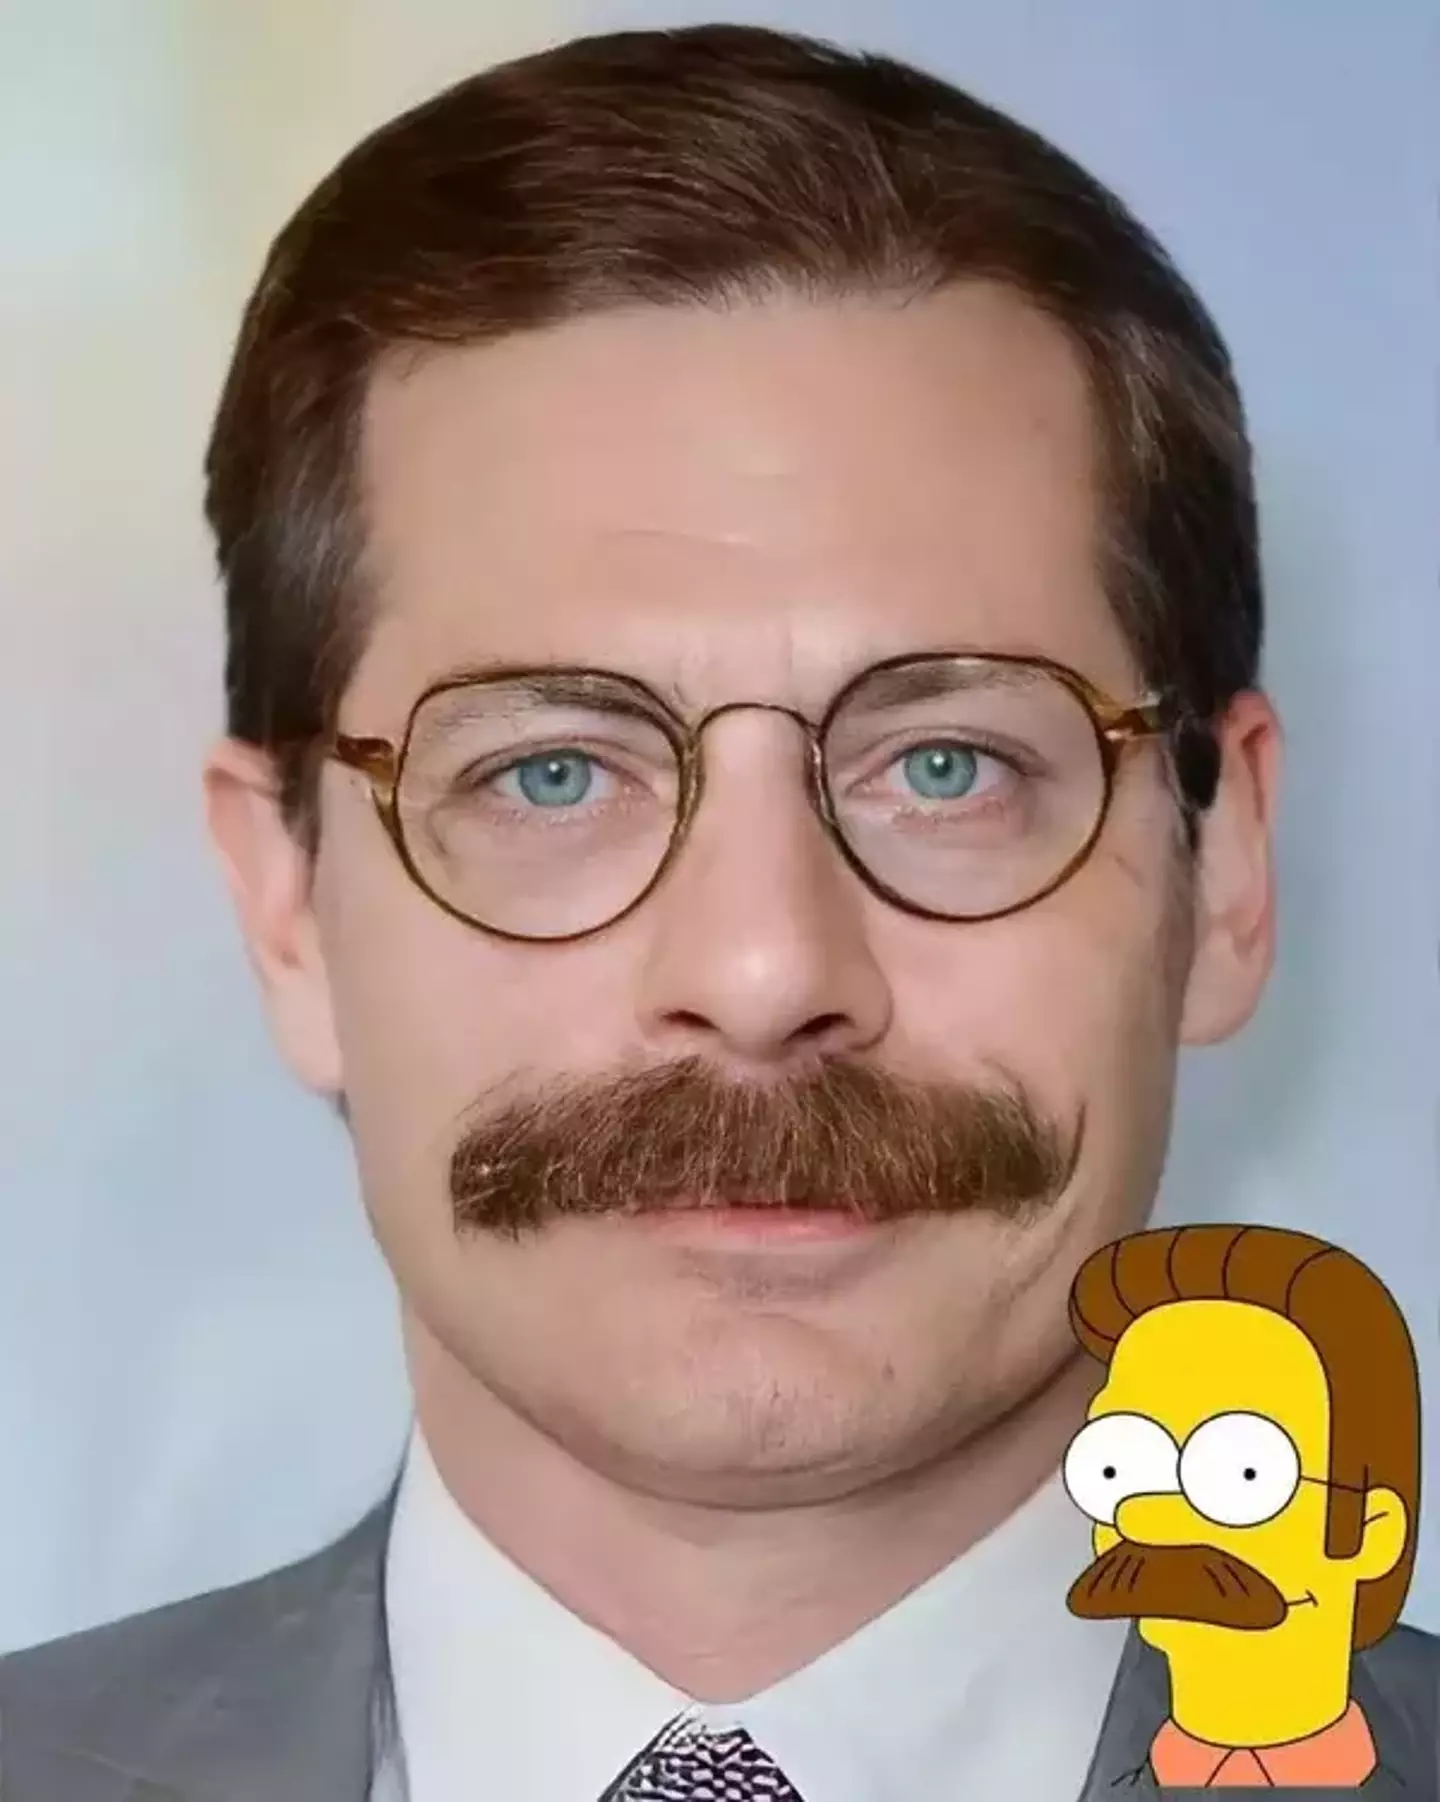 Ned Flanders is spot on, I must say. (Instagram/@hidreley)